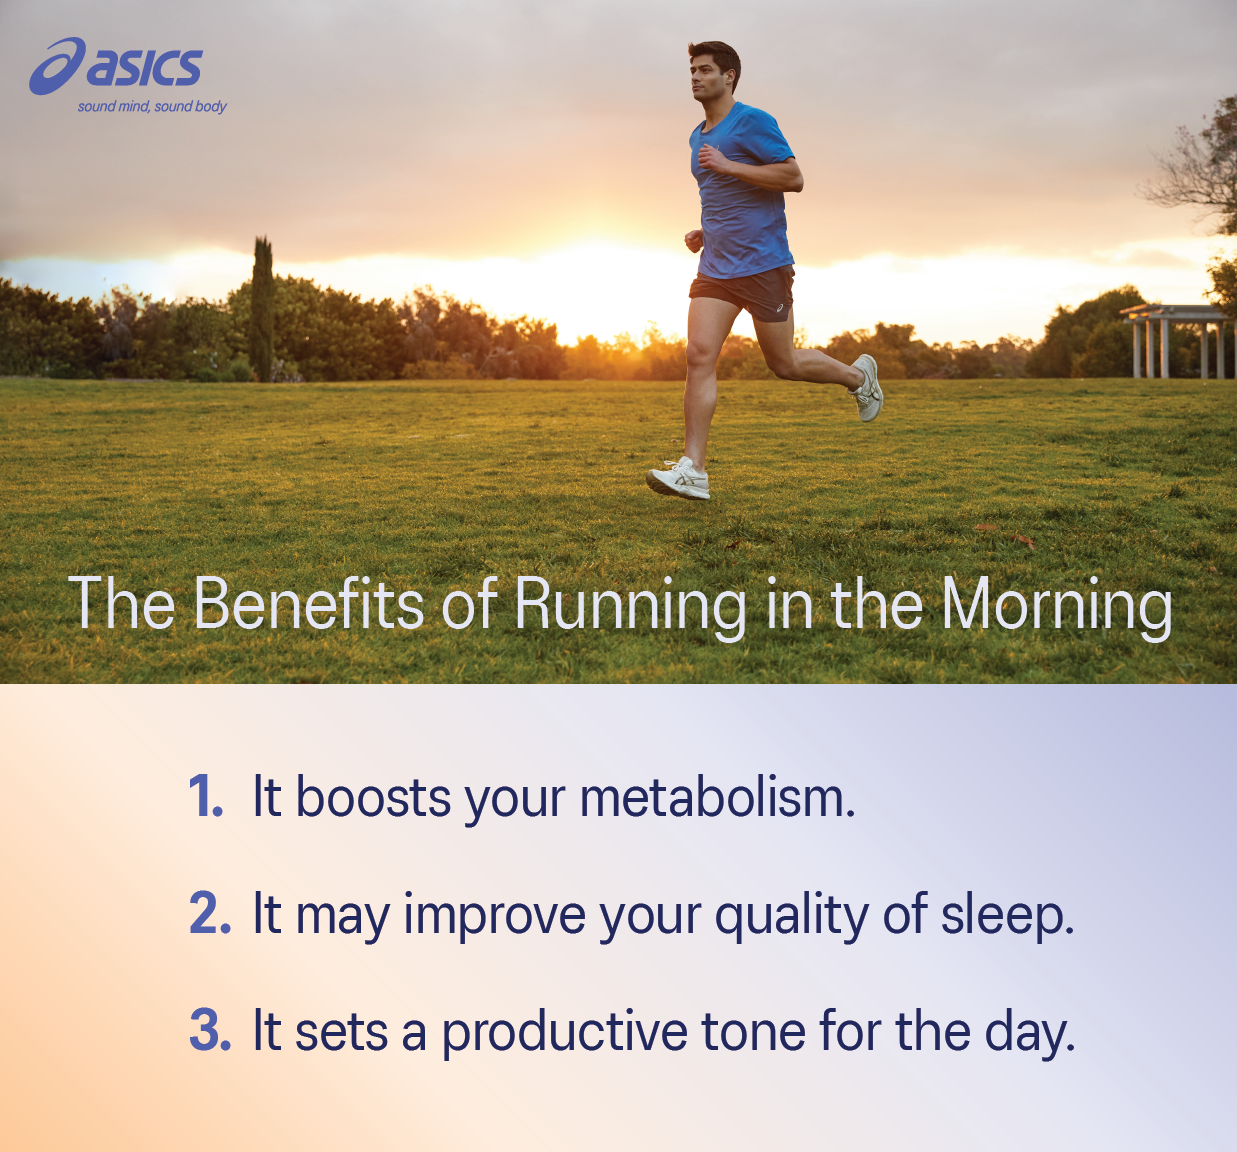 Is It OK to Run Every Day? What Are the Benefits?.